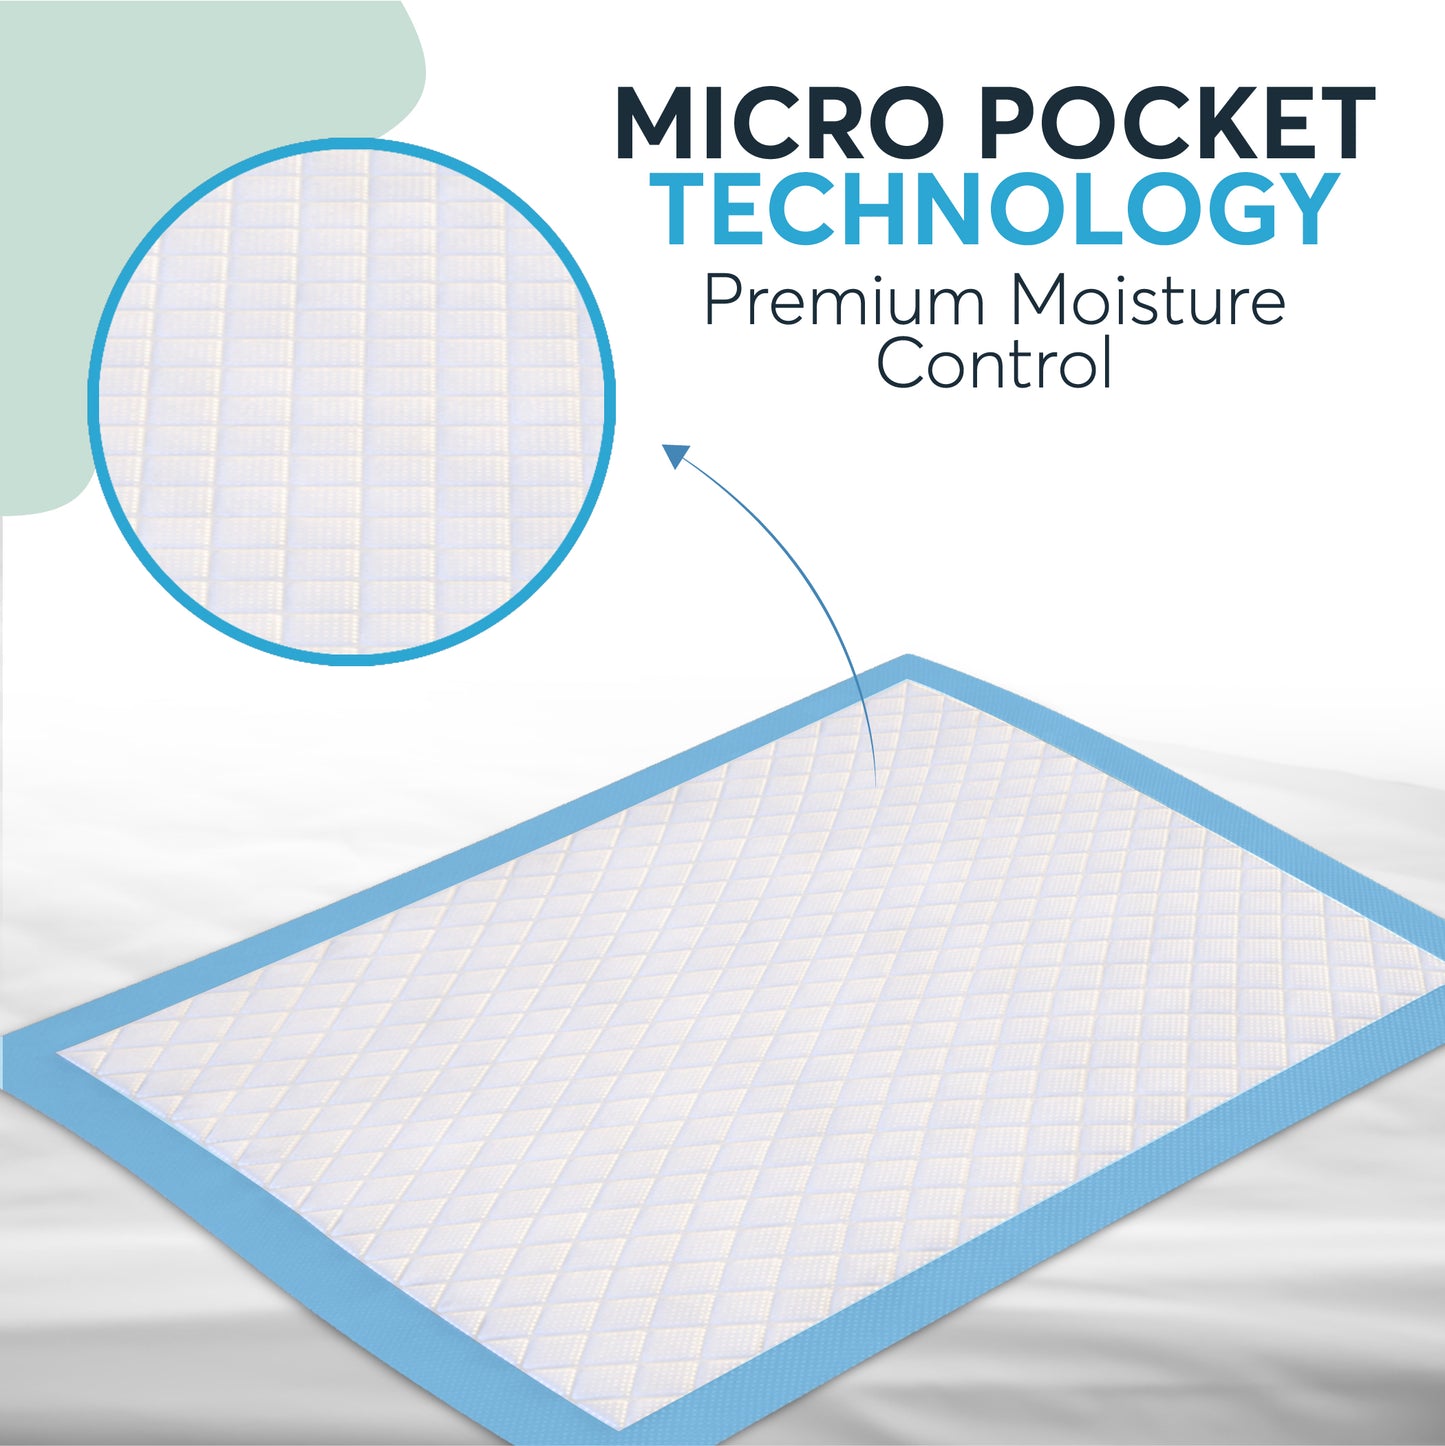 Incontinence Bed Pads 60x90 cm (Qty: 25)